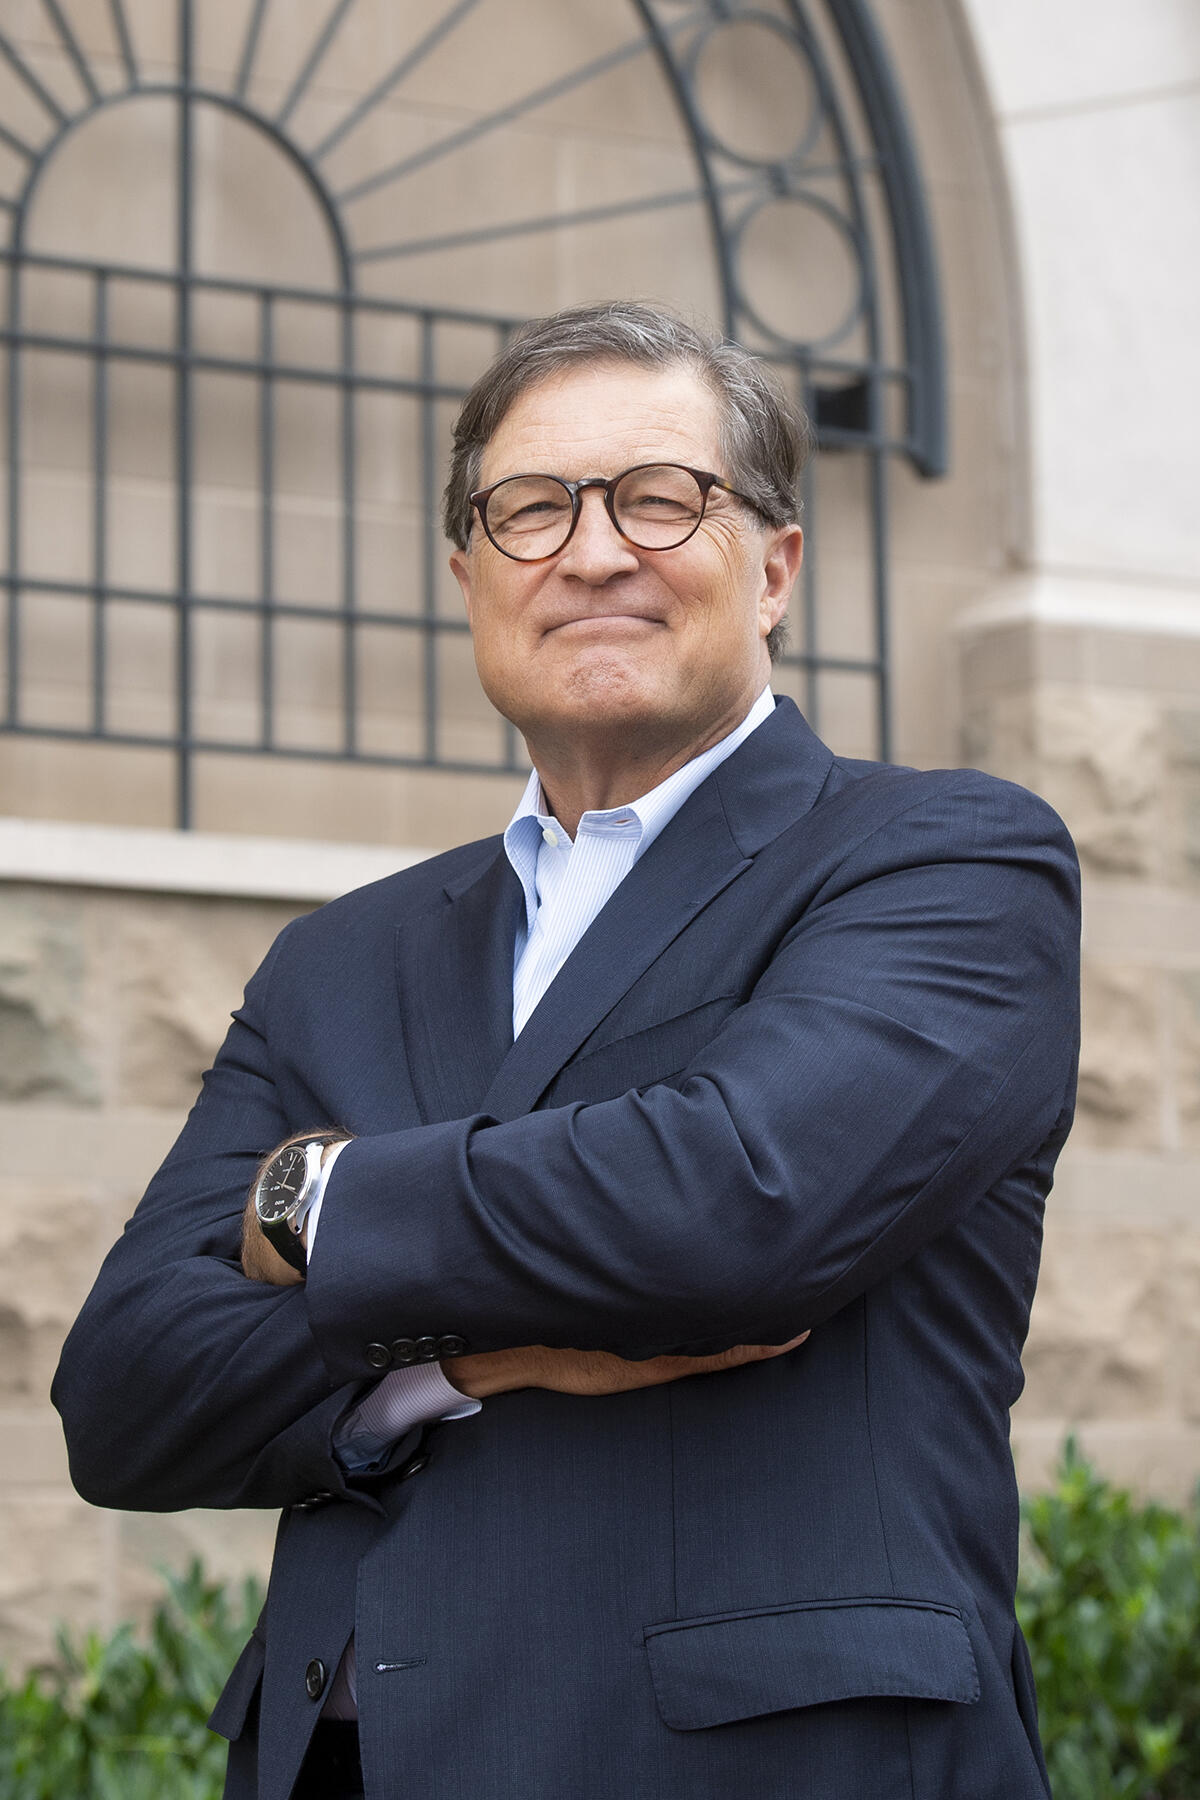 Jeffrey Lacker wearing a navy suit, glasses and a light blue and white shirt. He is staring at the camera with his arms crossed